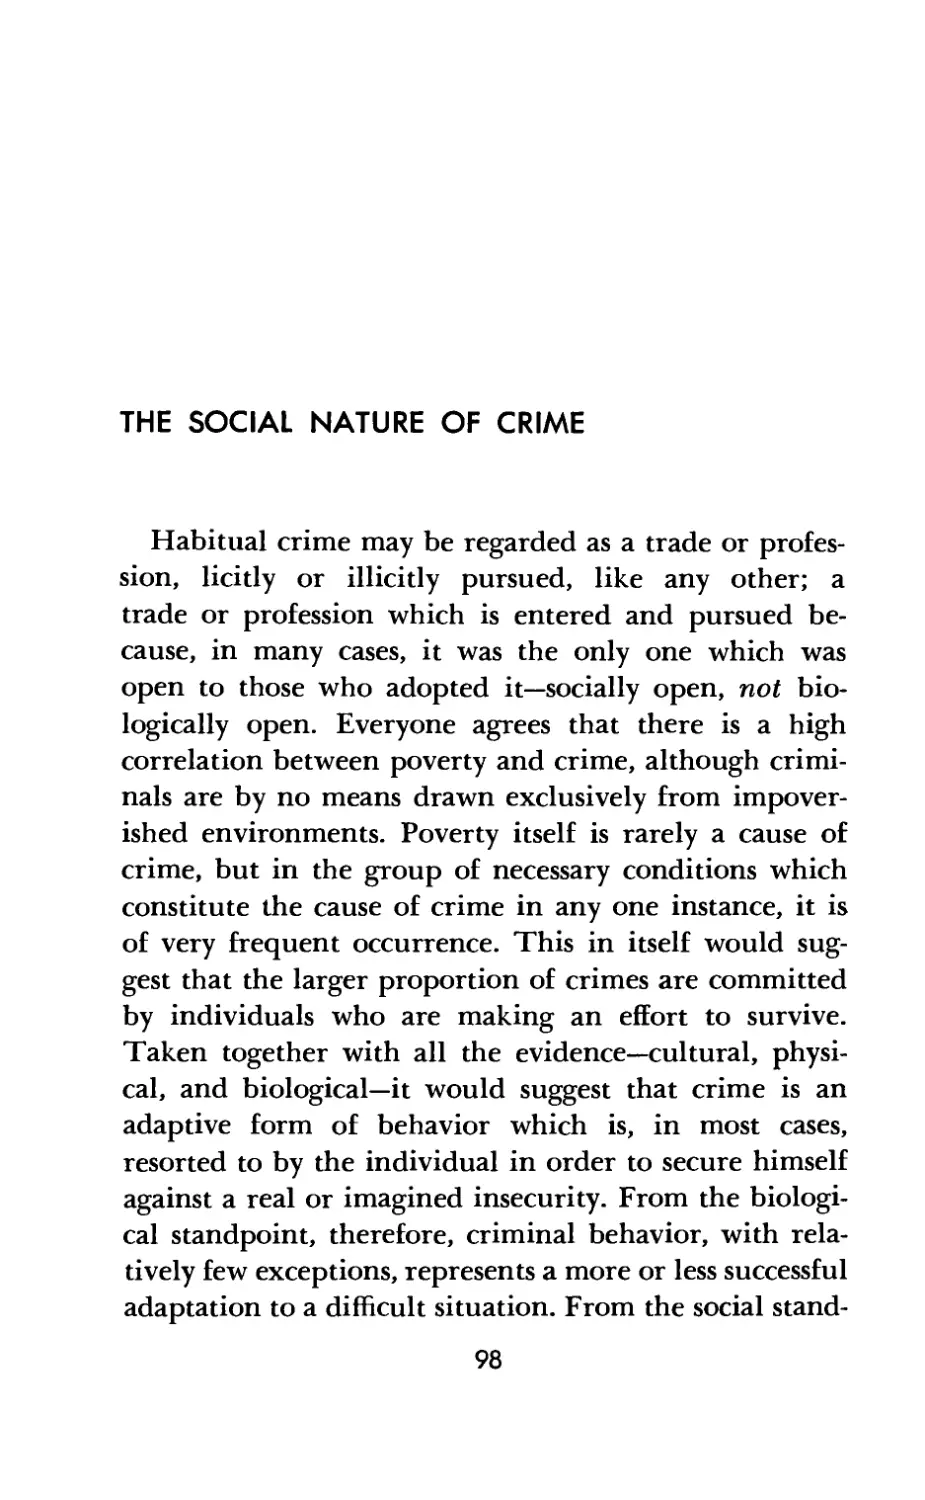 The Social Nature of Crime